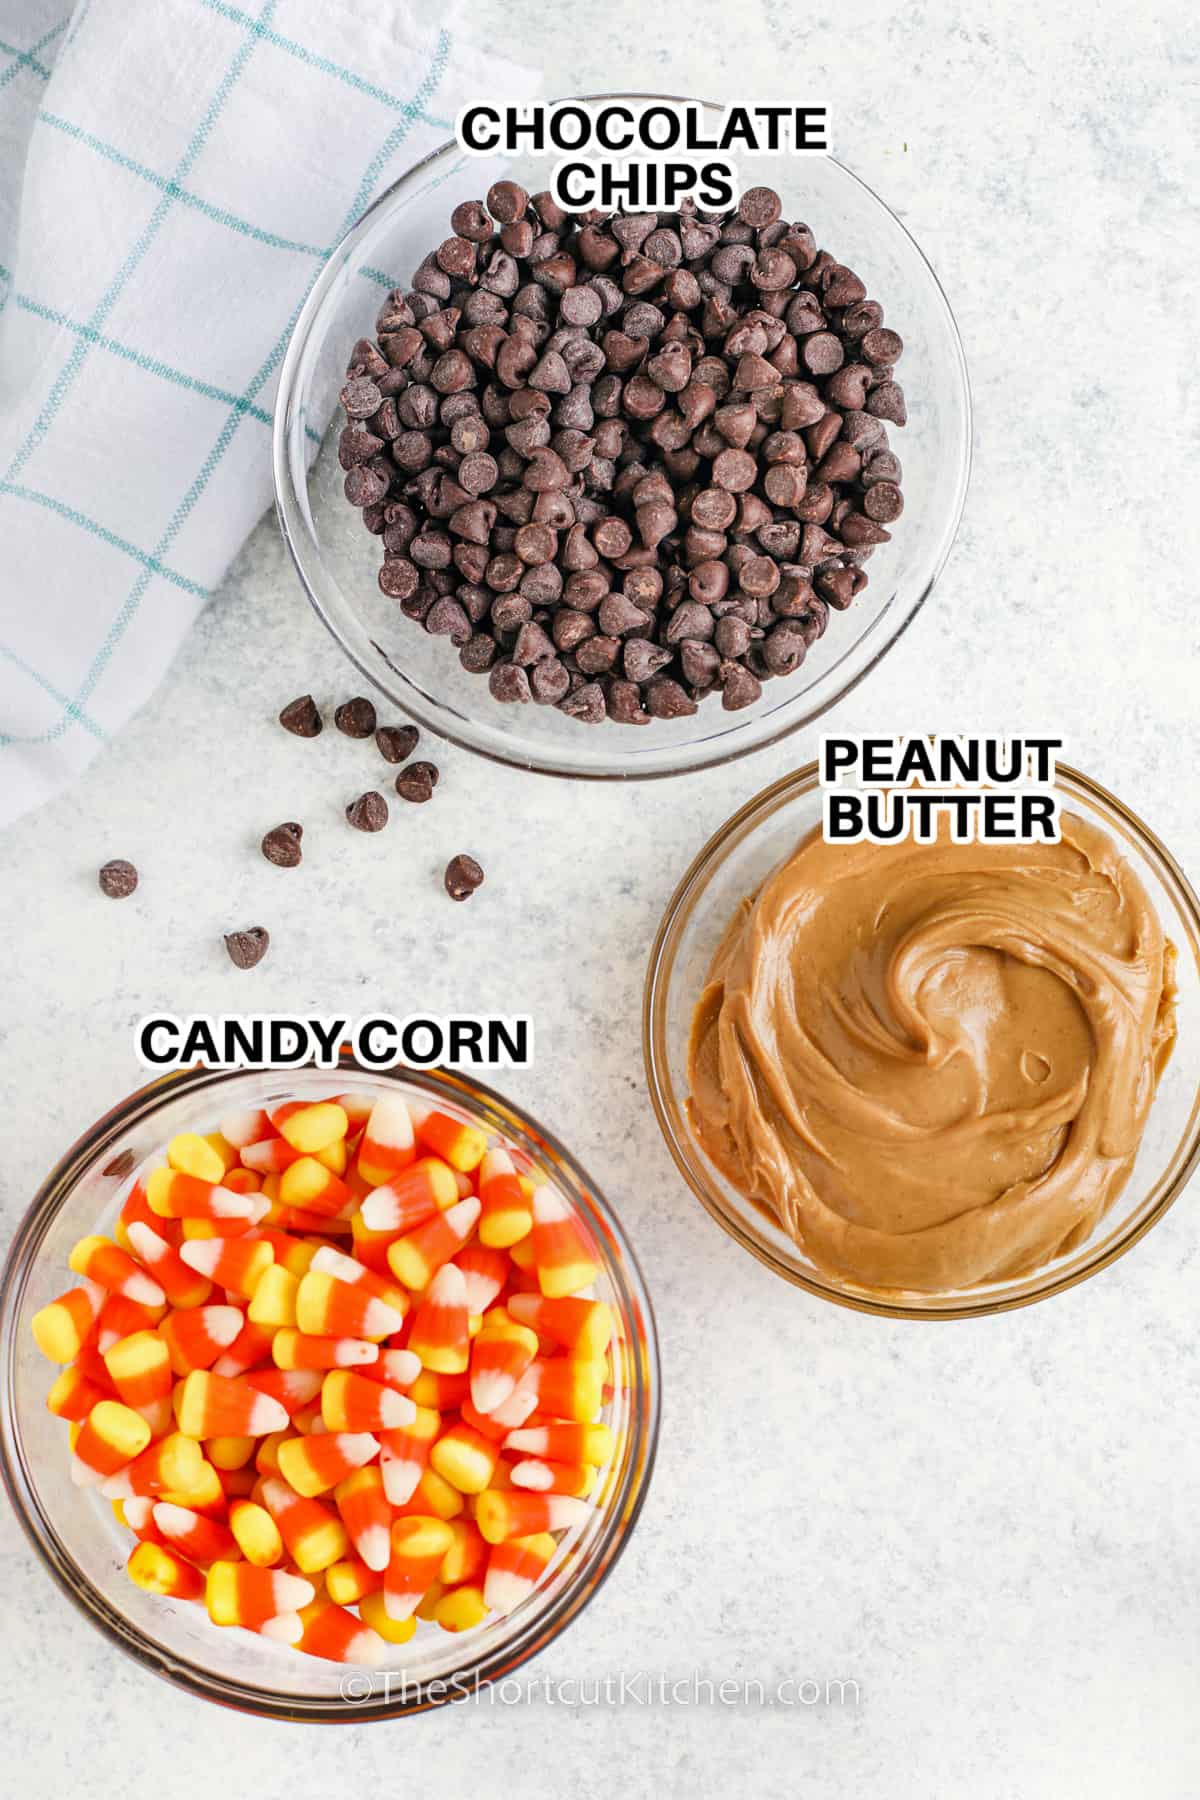 ingredients to make homemade butterfinger including chocolate chips, candy corn, and peanut butter